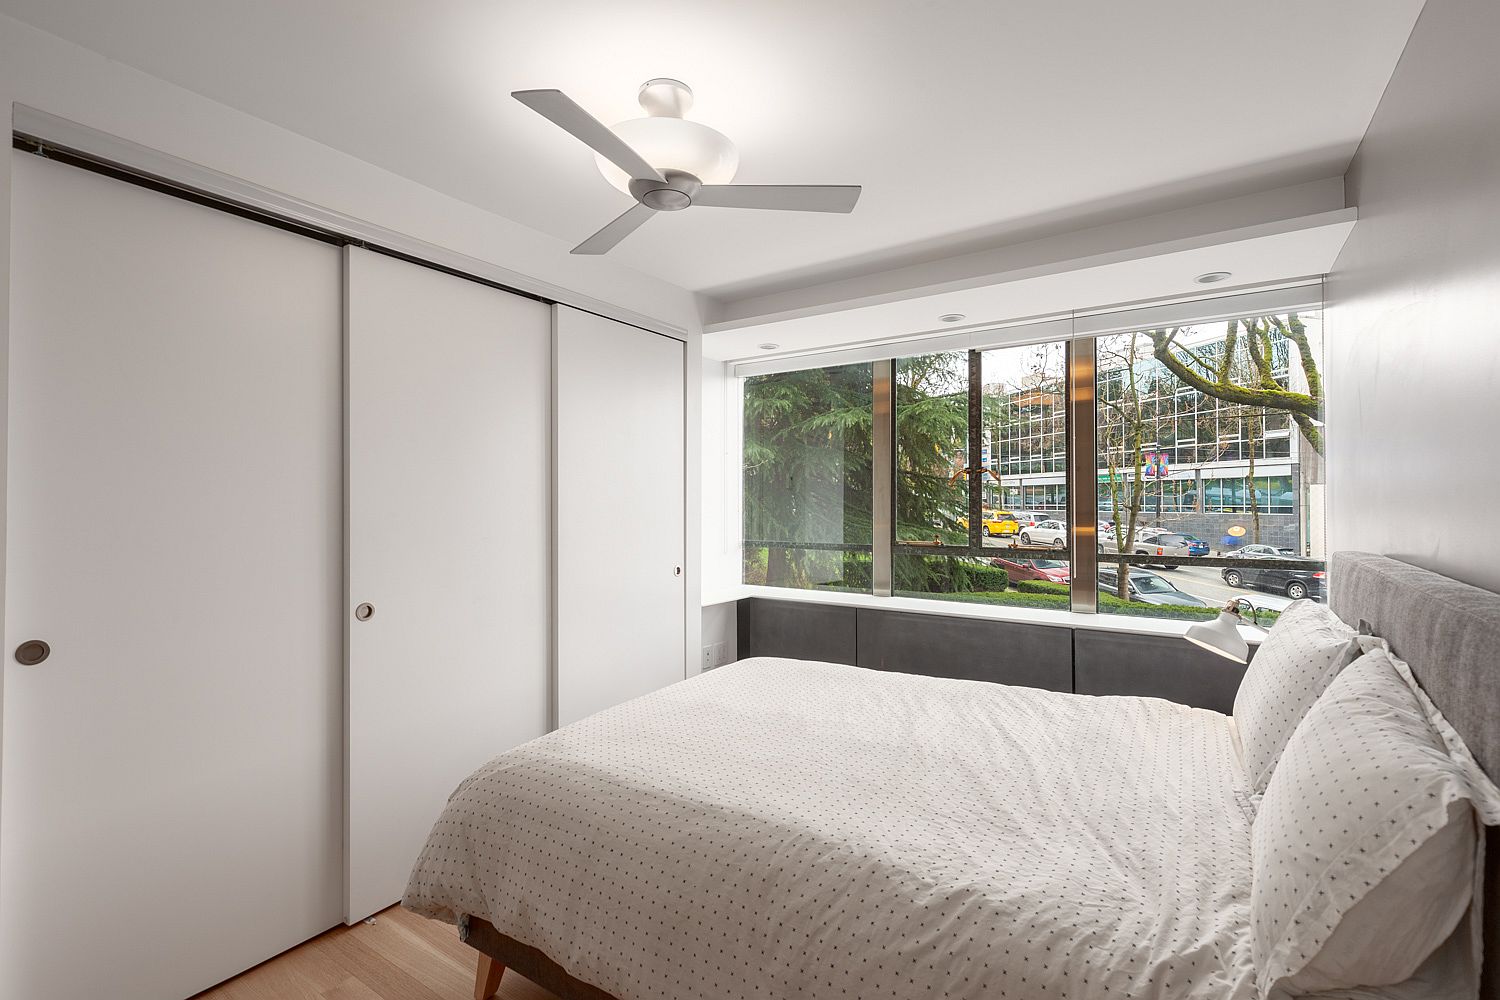 Sliding closet doors in white give the bedroom a space-savvy appeal